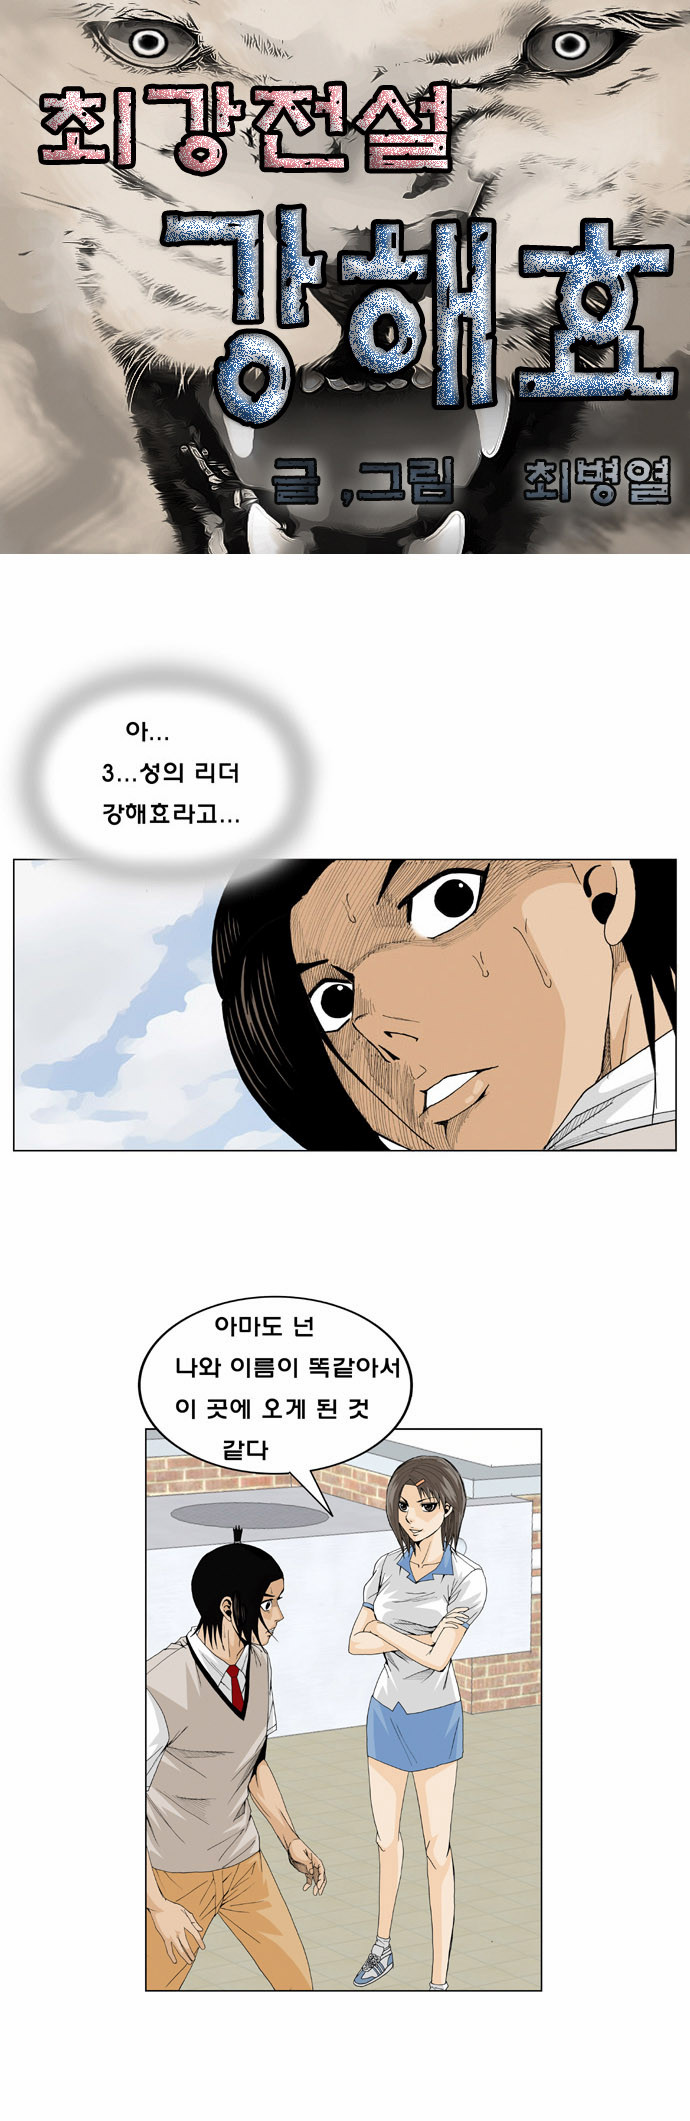 Ultimate Legend - Kang Hae Hyo - Chapter 8 - Page 2